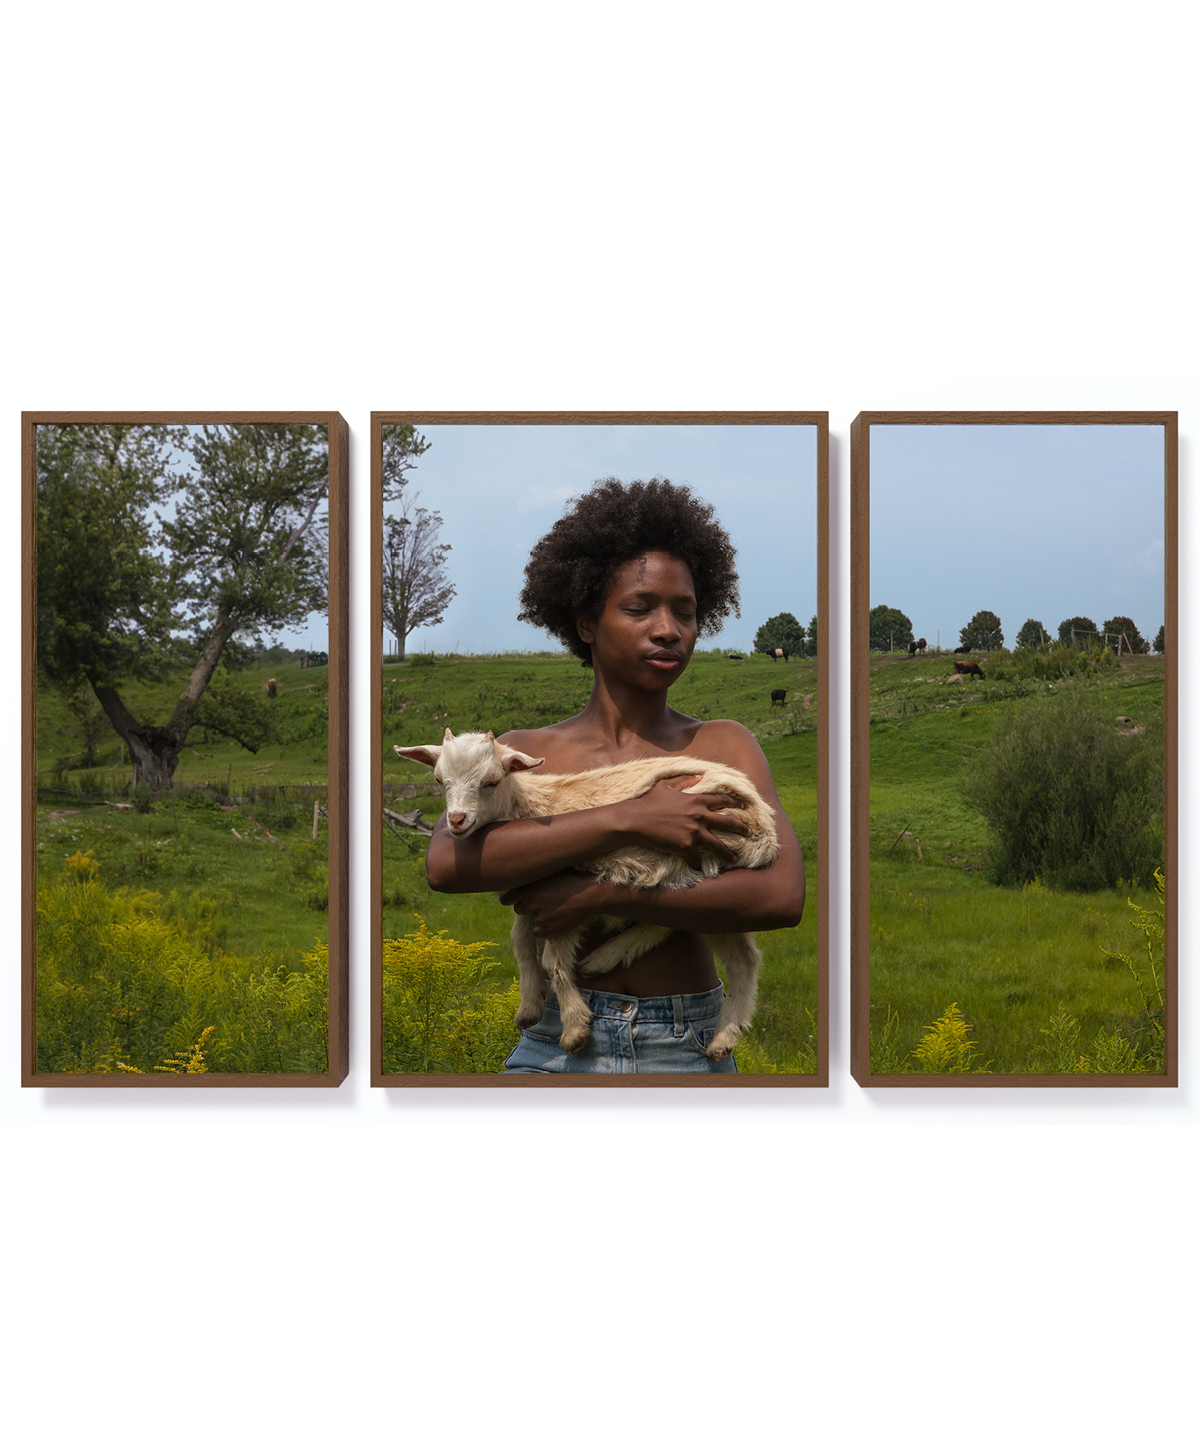 A triptych photograph. In the middle panel a Black perosn is shown with their eyes wearing jeans and holding a small goat. The background and adjacent two panels show a rolling green hill landscape and blue sky.